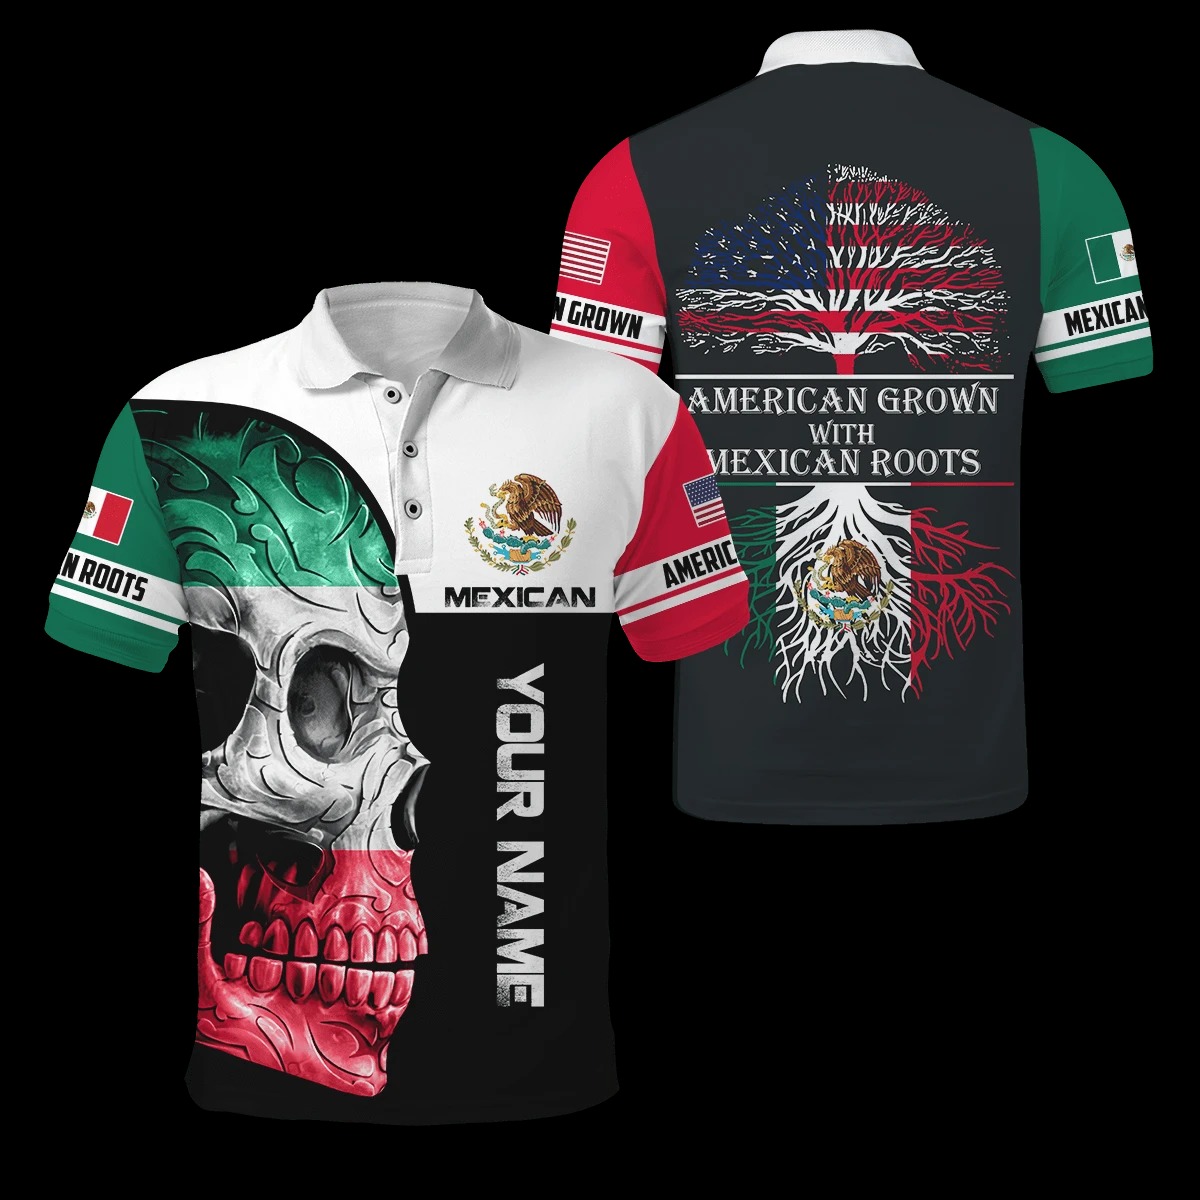 Personalized Skull Coat Of Arms mexico American grown with Mexican roots custom Polo shirt – LIMITED EDITION